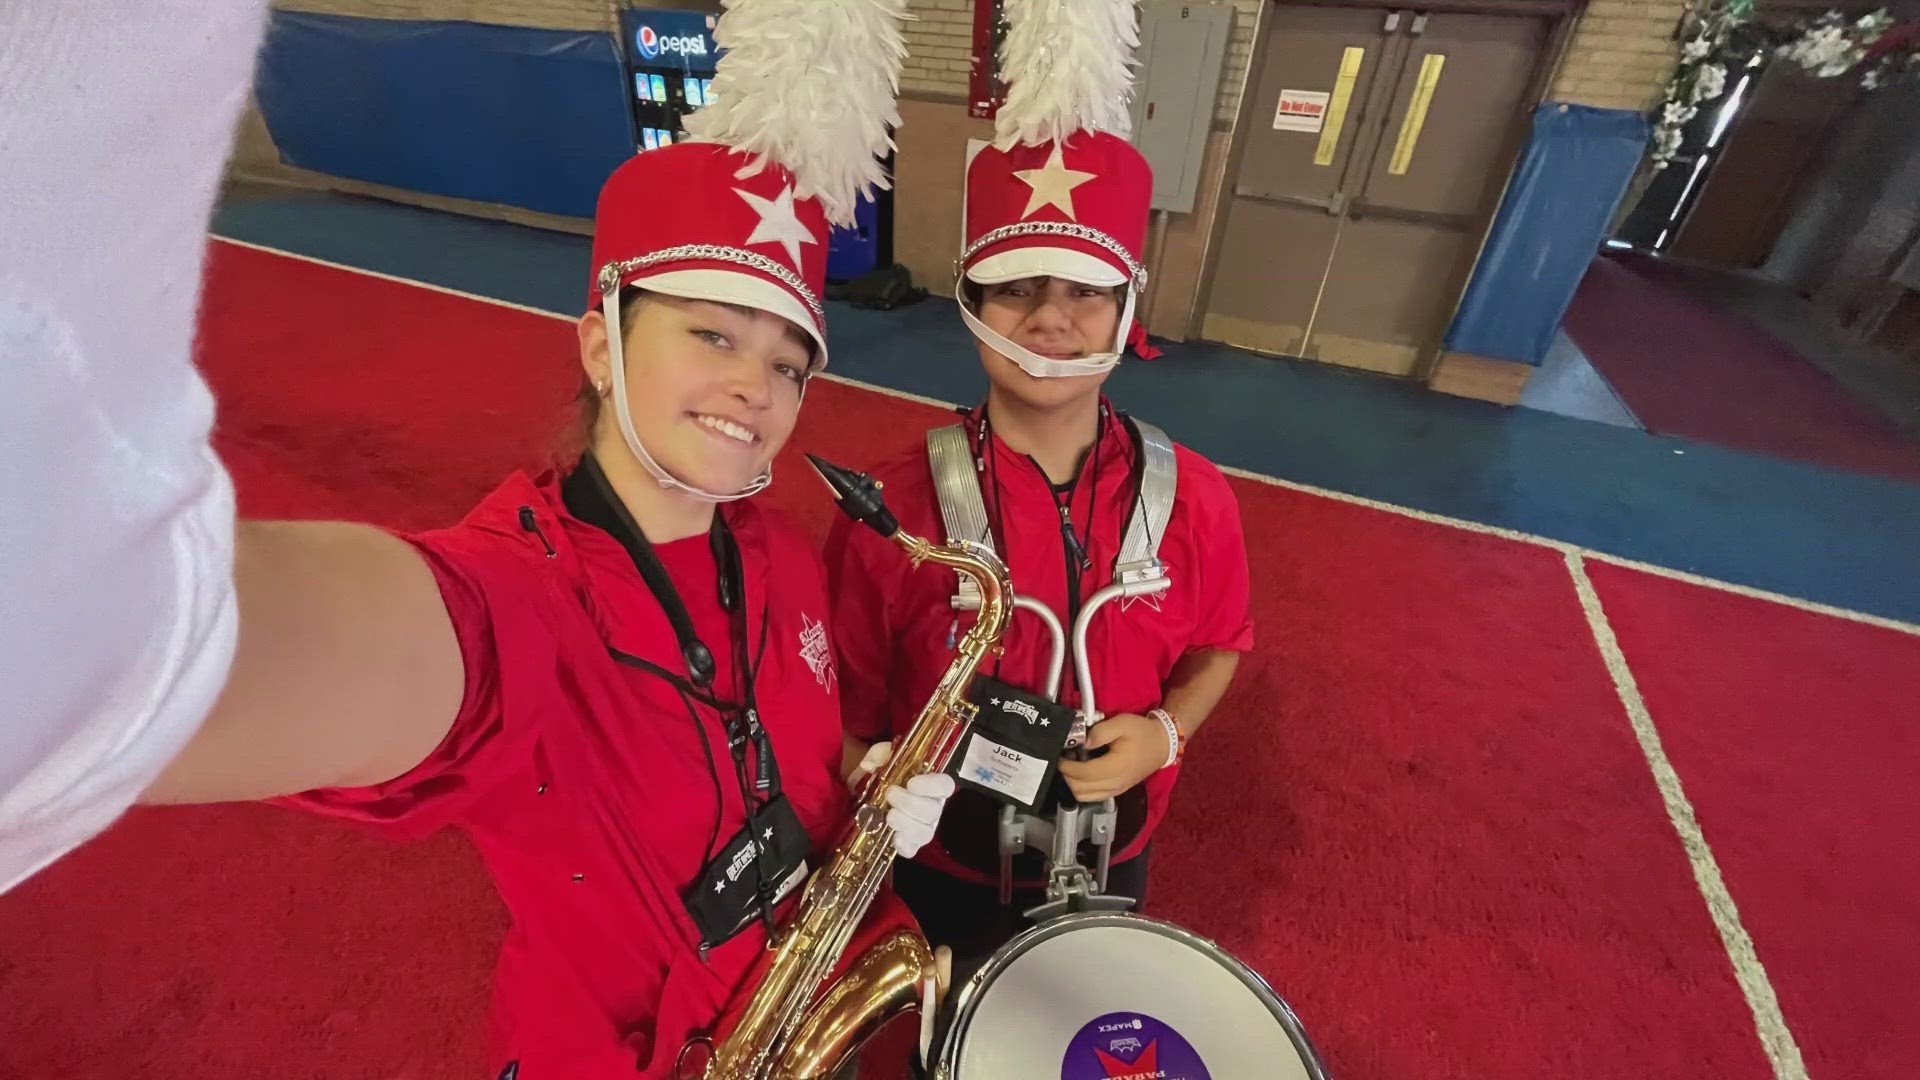 Two students from Ralston Valley High School get ready to perform on their biggest stage yet: they'll represent Colorado at the Macy's Thanksgiving Day Parade.